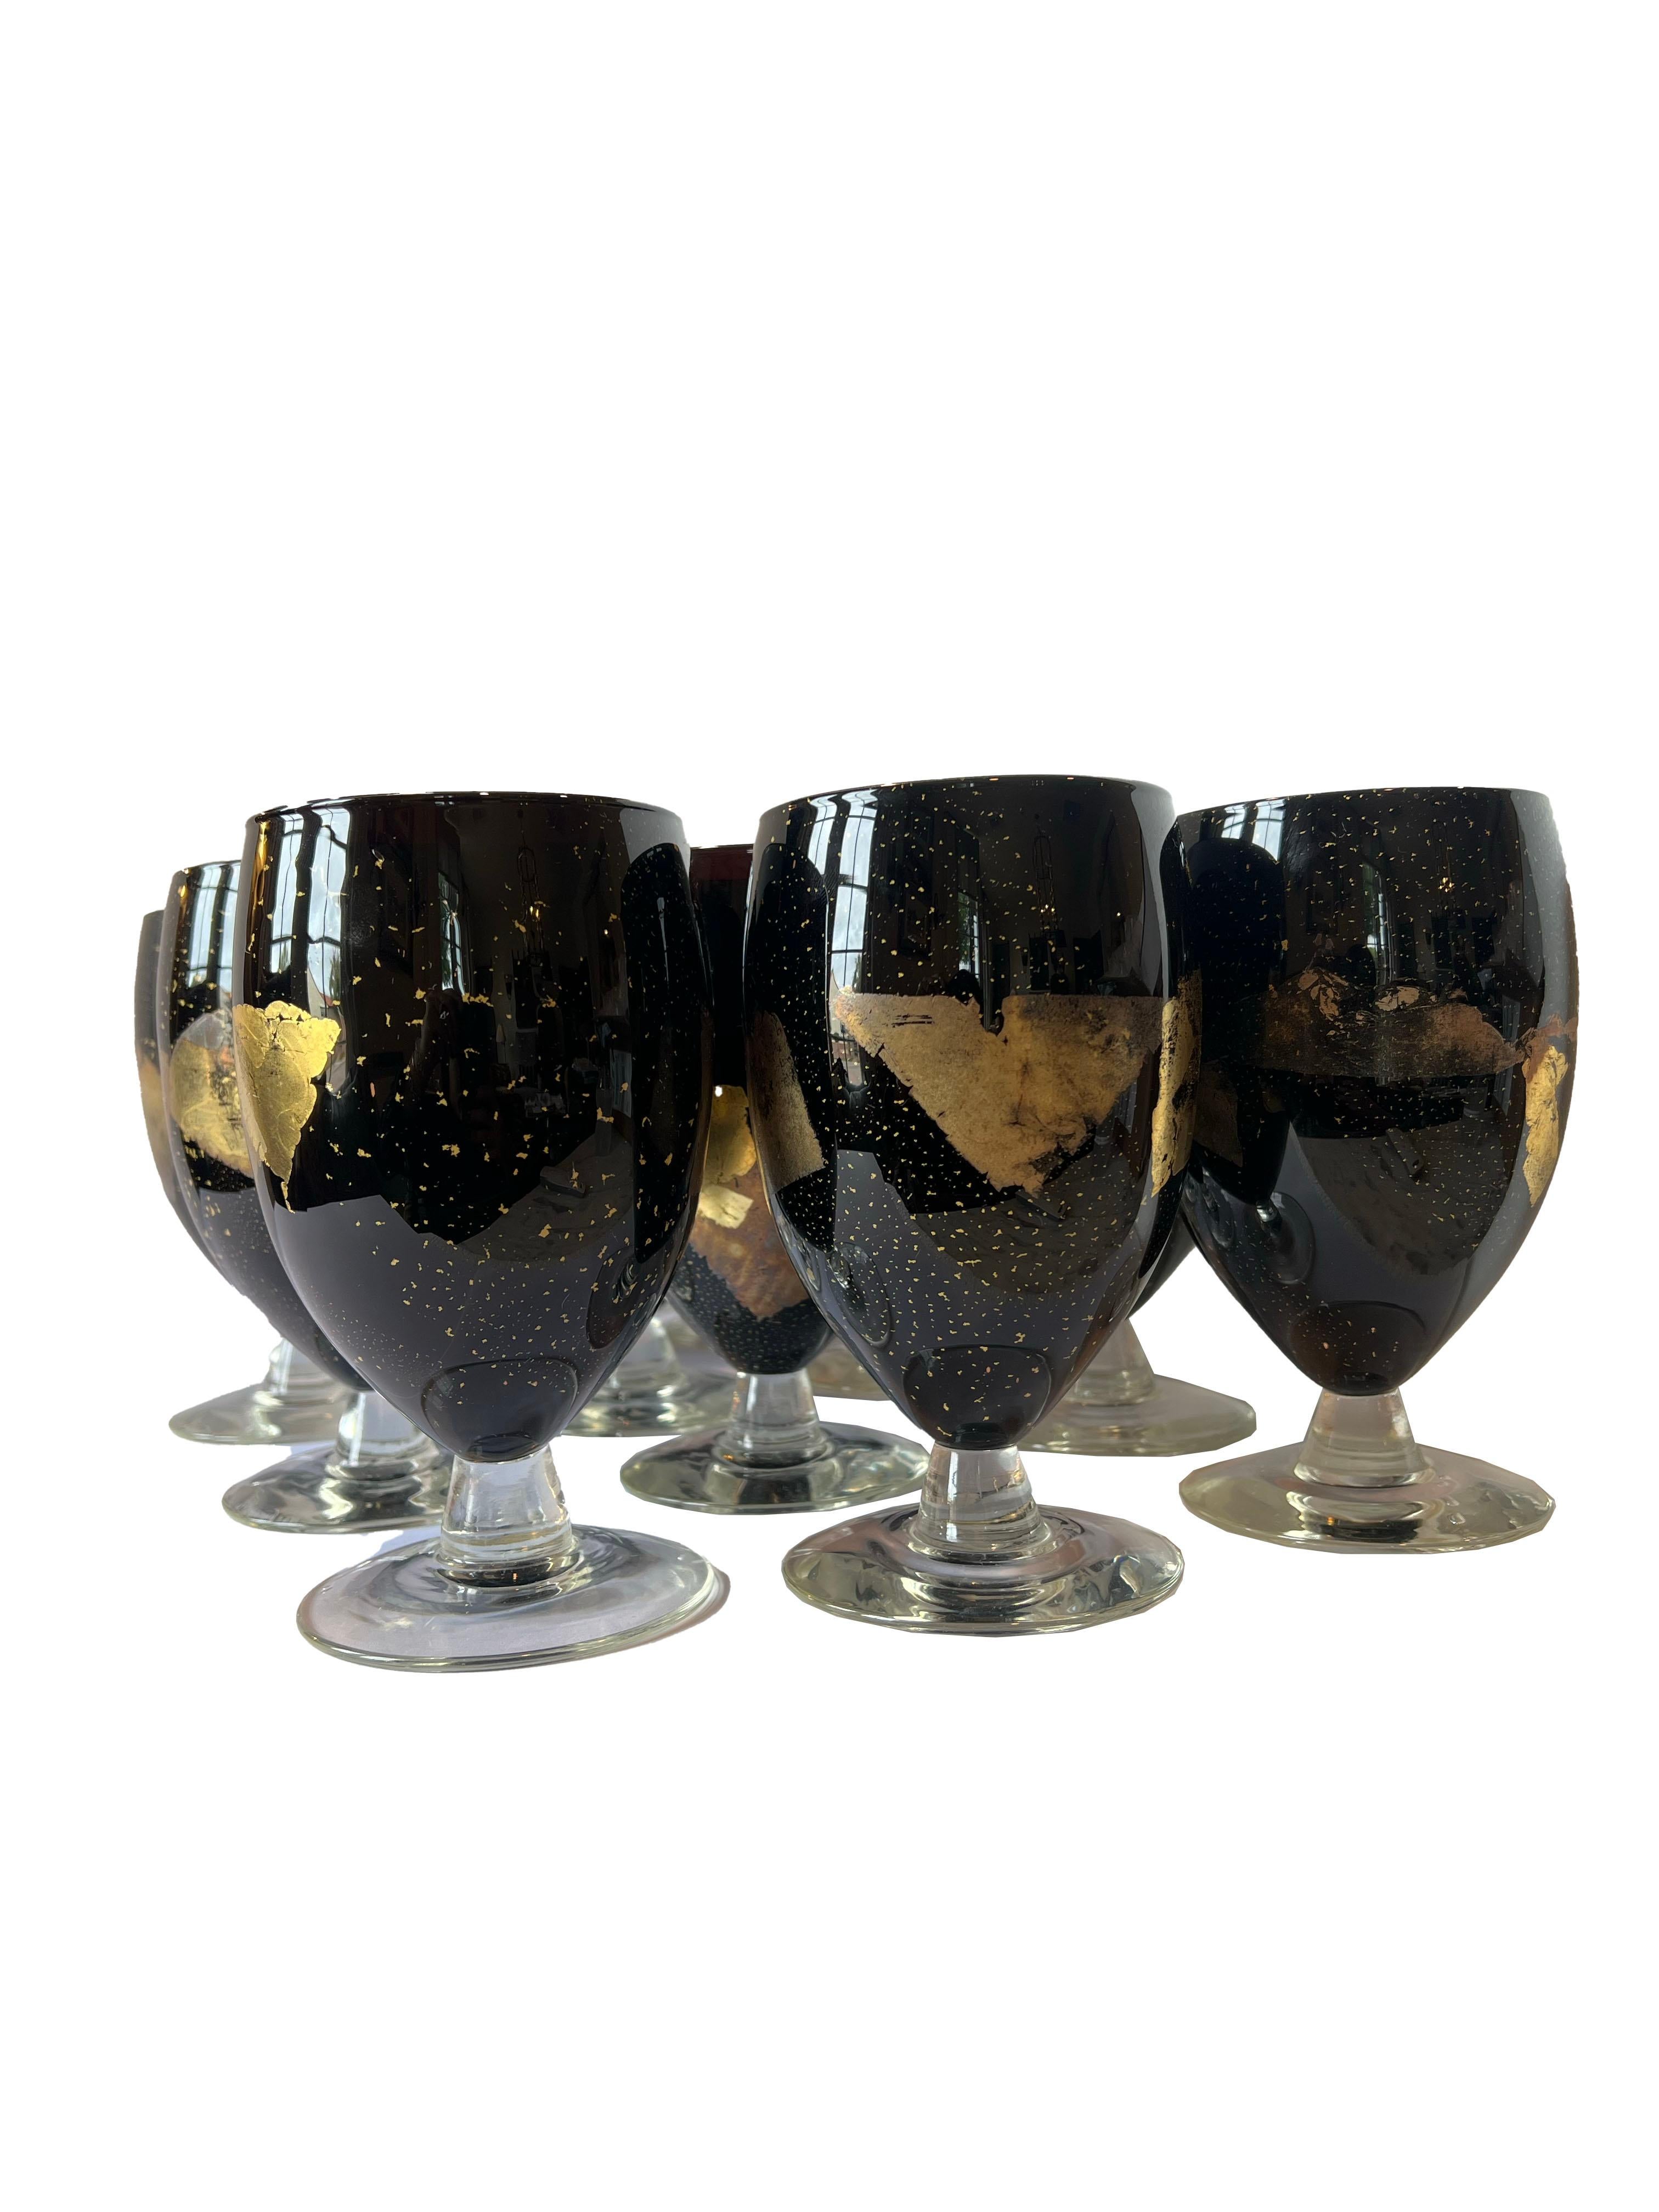 An exquisite set of eleven Randy Strong Goblets, each a masterpiece signed with etching on the base. These goblets, meticulously hand-blown, showcase the artistry of Randy Strong, a maestro in the world of glass craftsmanship. What makes this